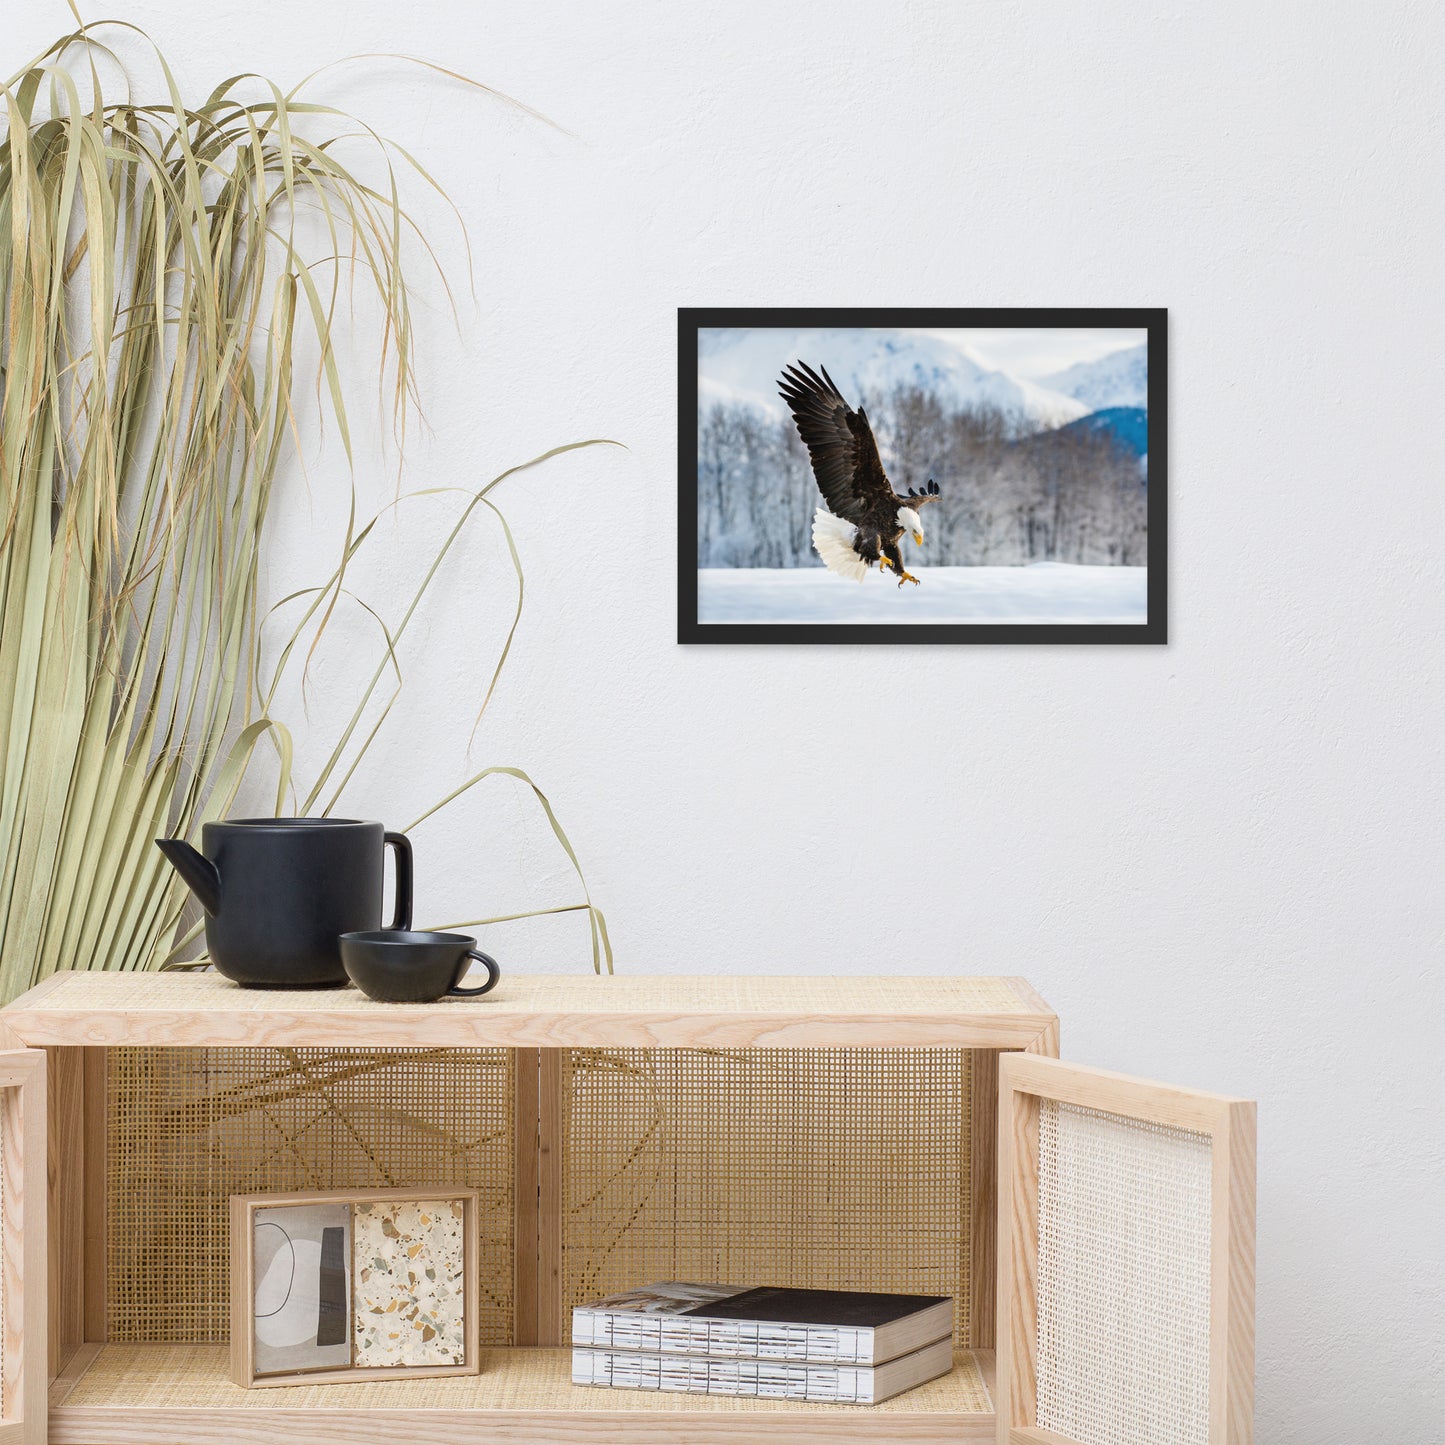 family room wall pictures, Adult Bald Eagle and Alaskan Winter Animal Wildlife Photograph Framed Wall Art Print